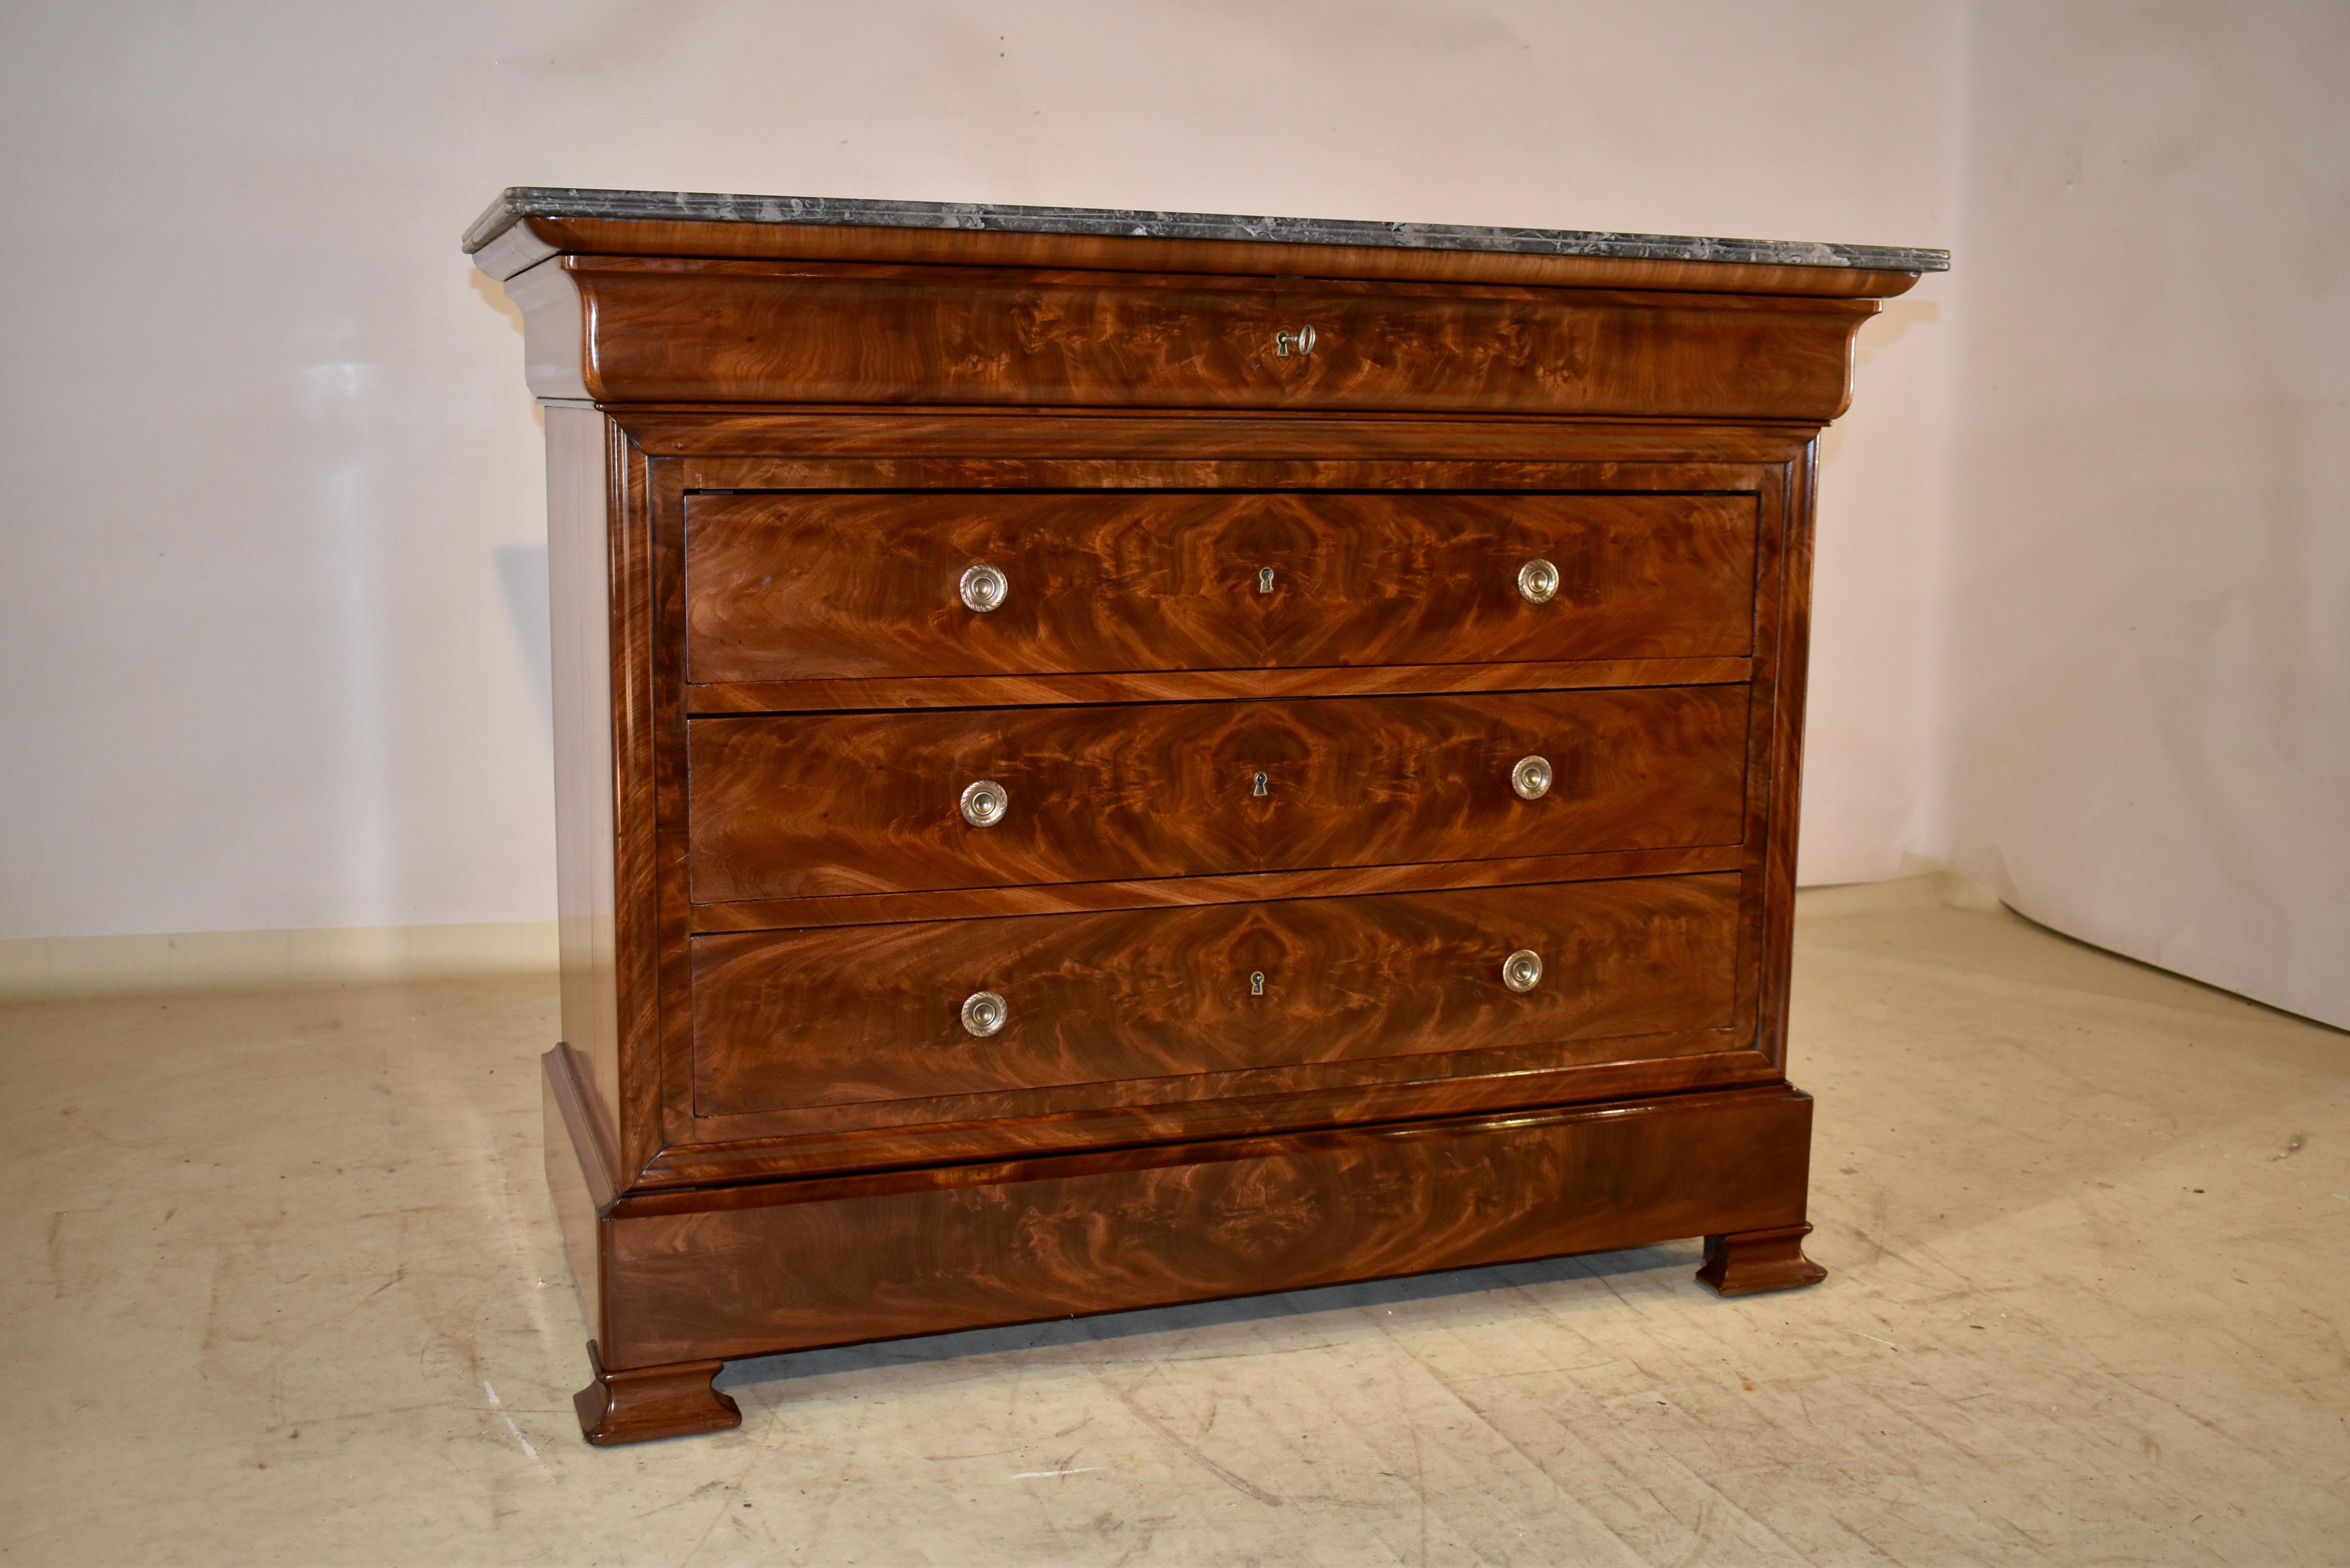 19th century commode from France made from Mahogany.  The top is made from exquisitely grained dark gray marble, sitting atop a mahogany case, which is fairly unusual in this type of piece.  The sides are simple and have the shaped molding at the